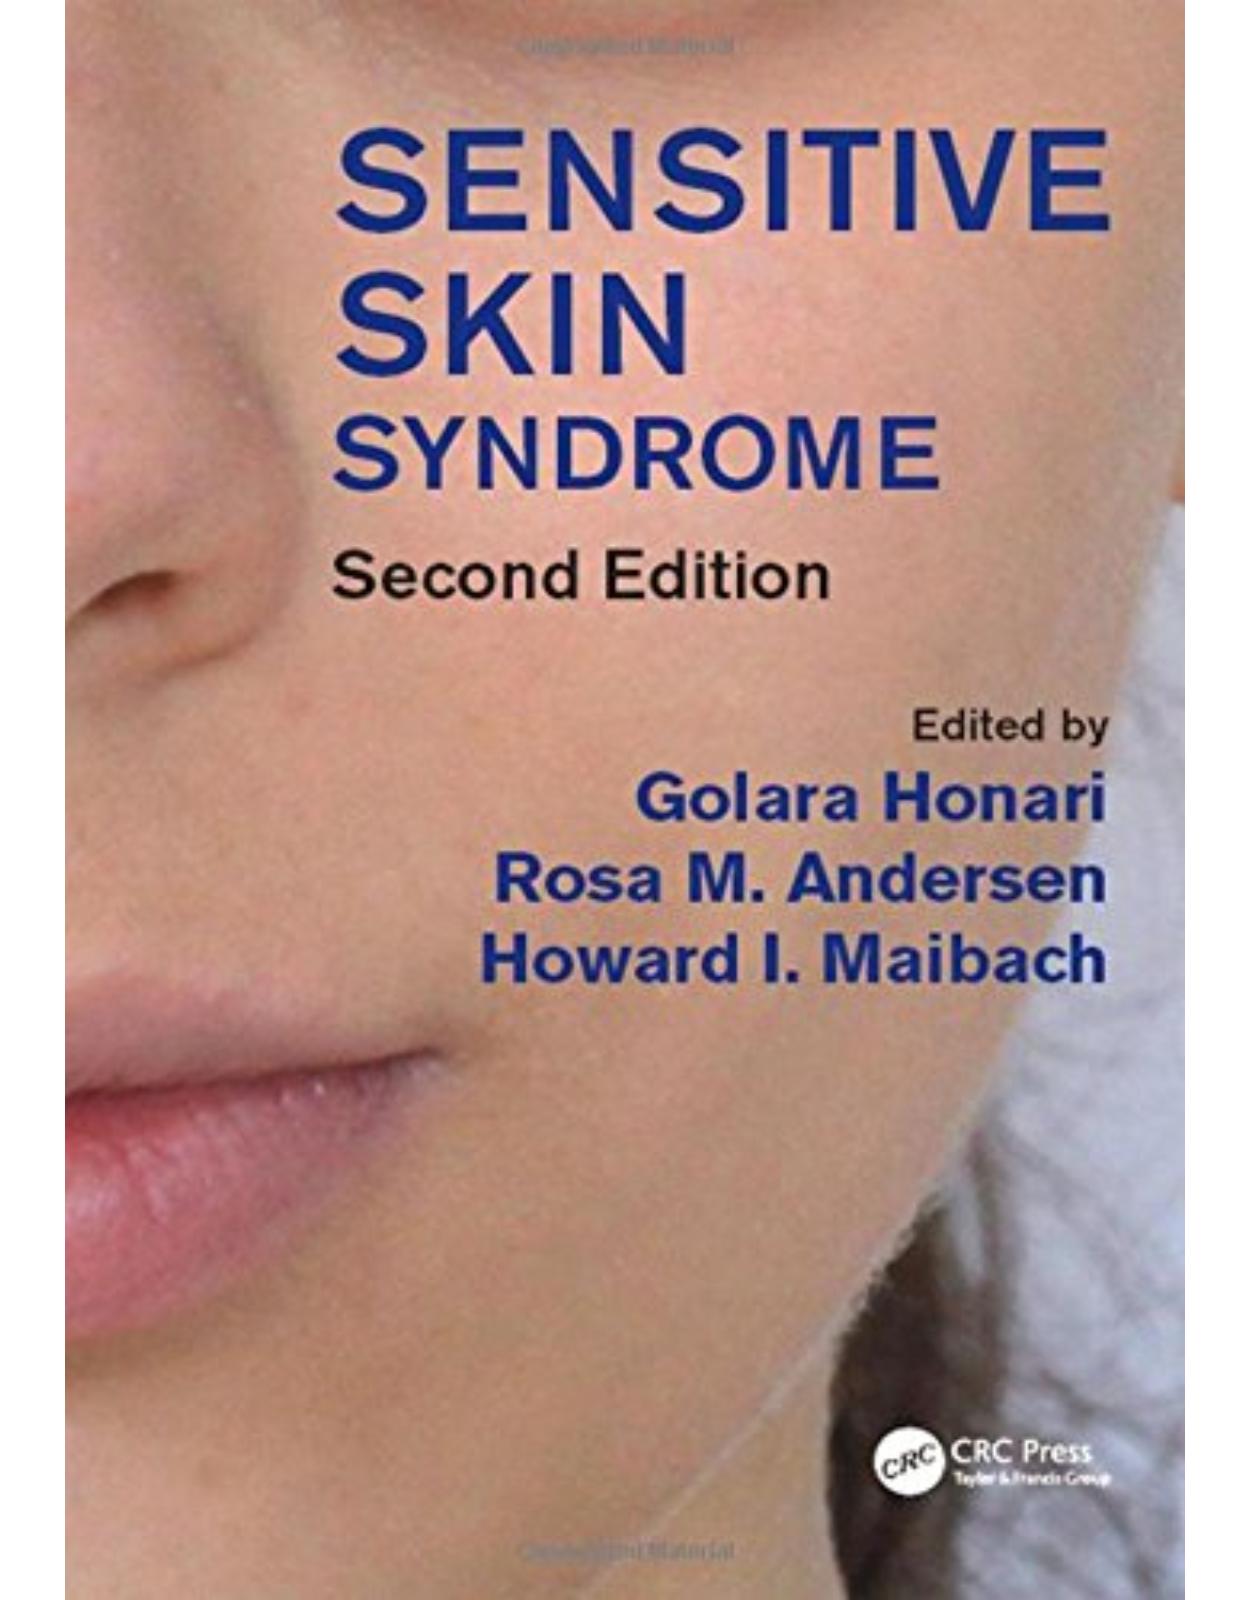 Sensitive Skin Syndrome, Second Edition